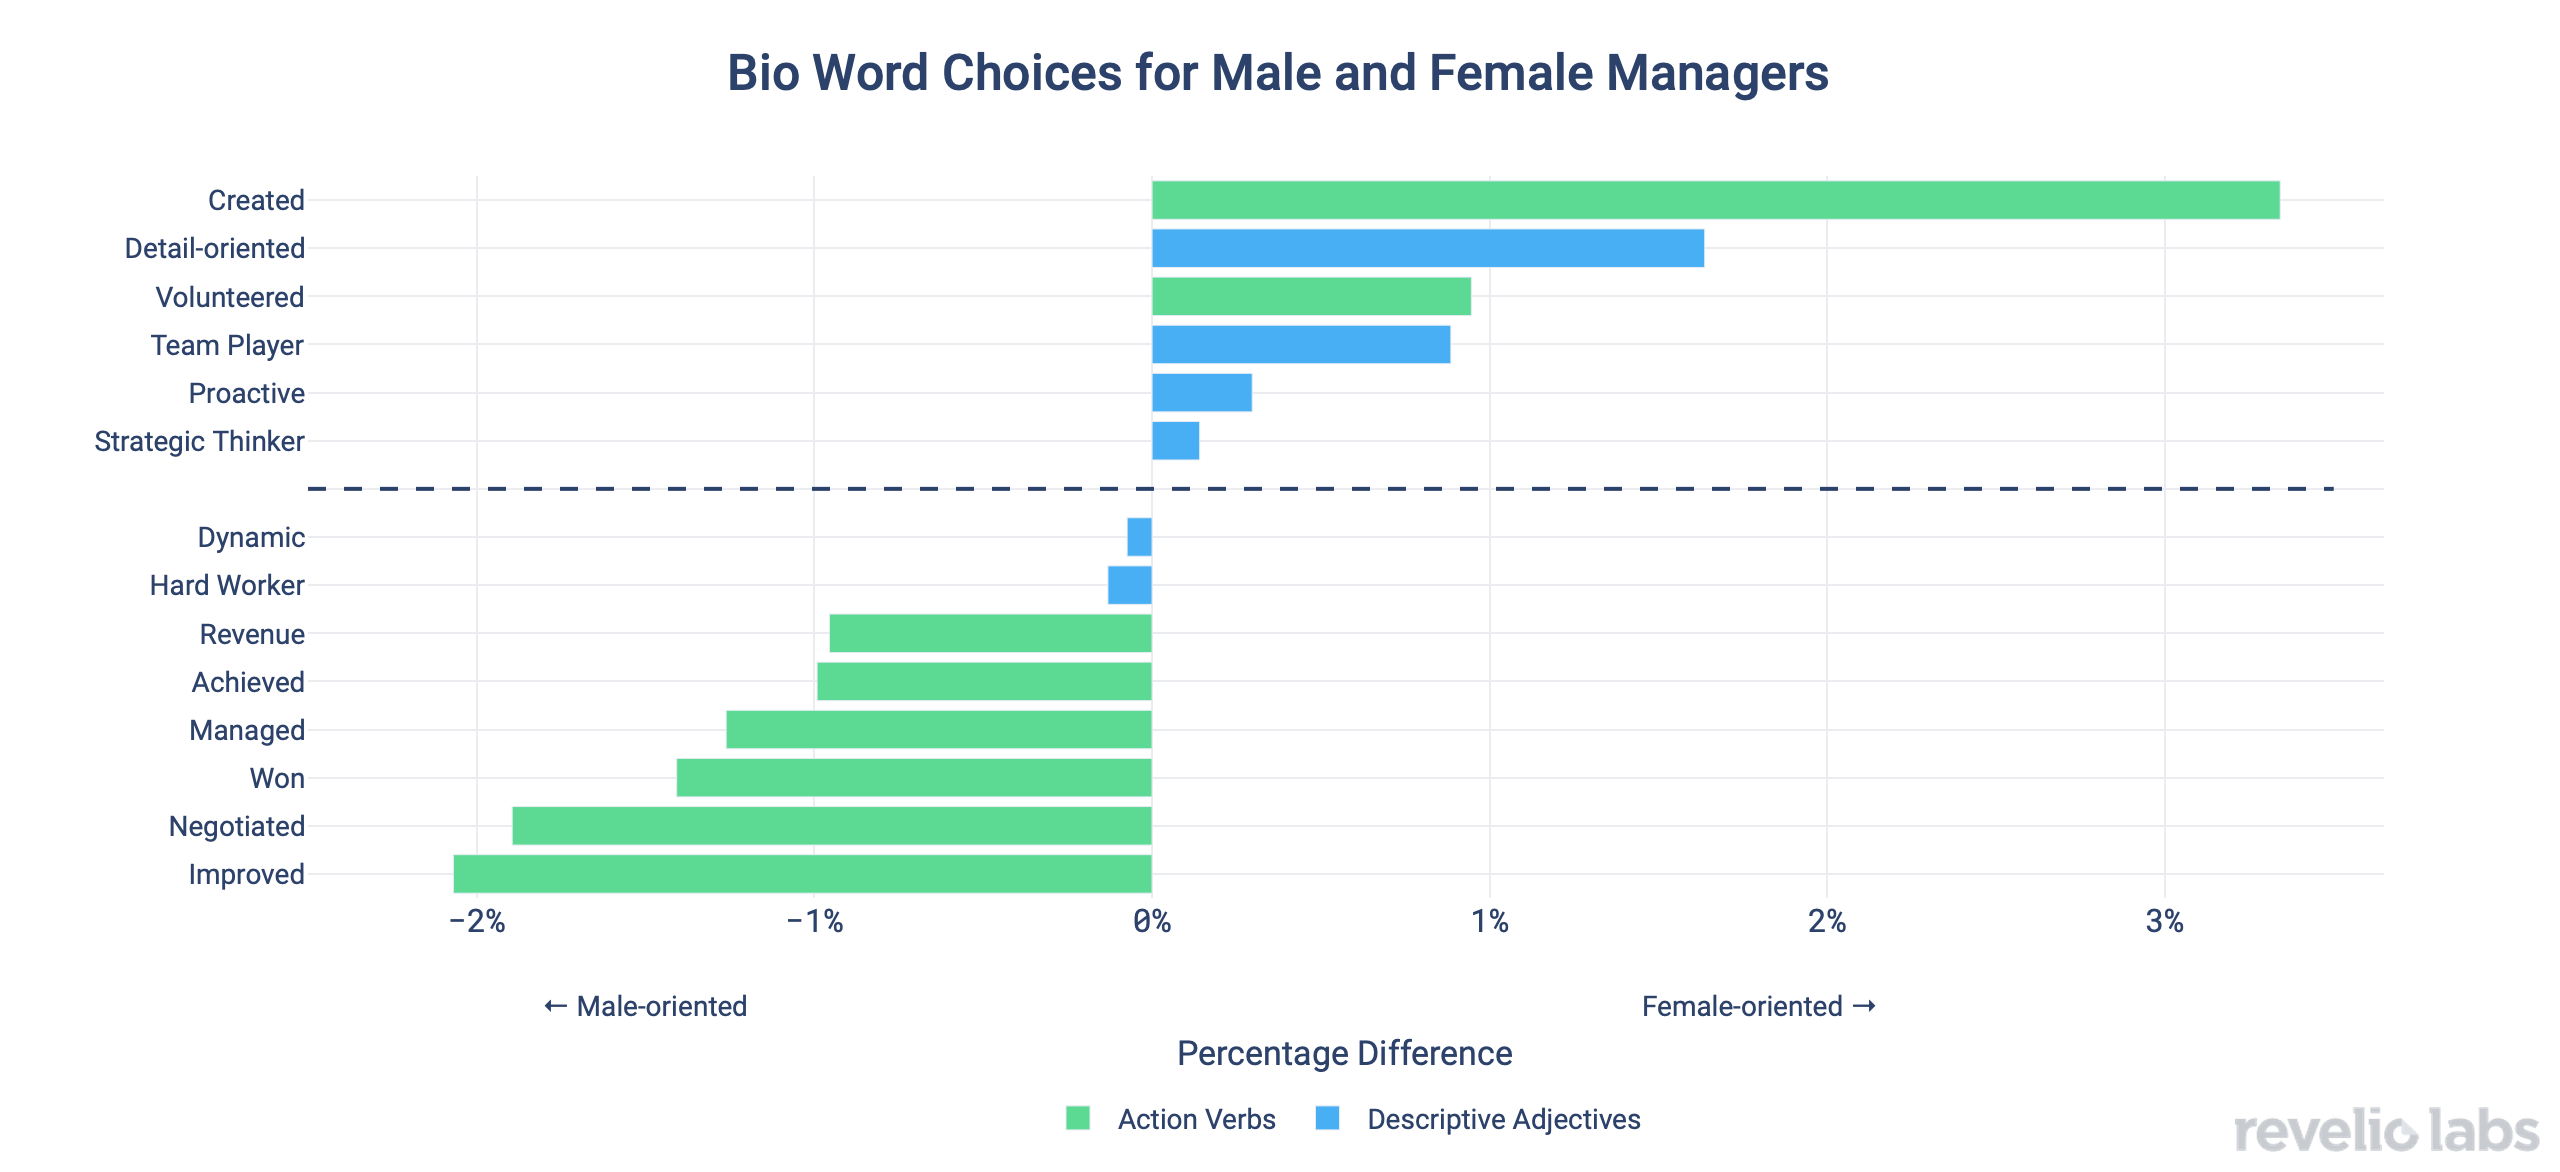 bio-word-choices-for-male-and-female-managers